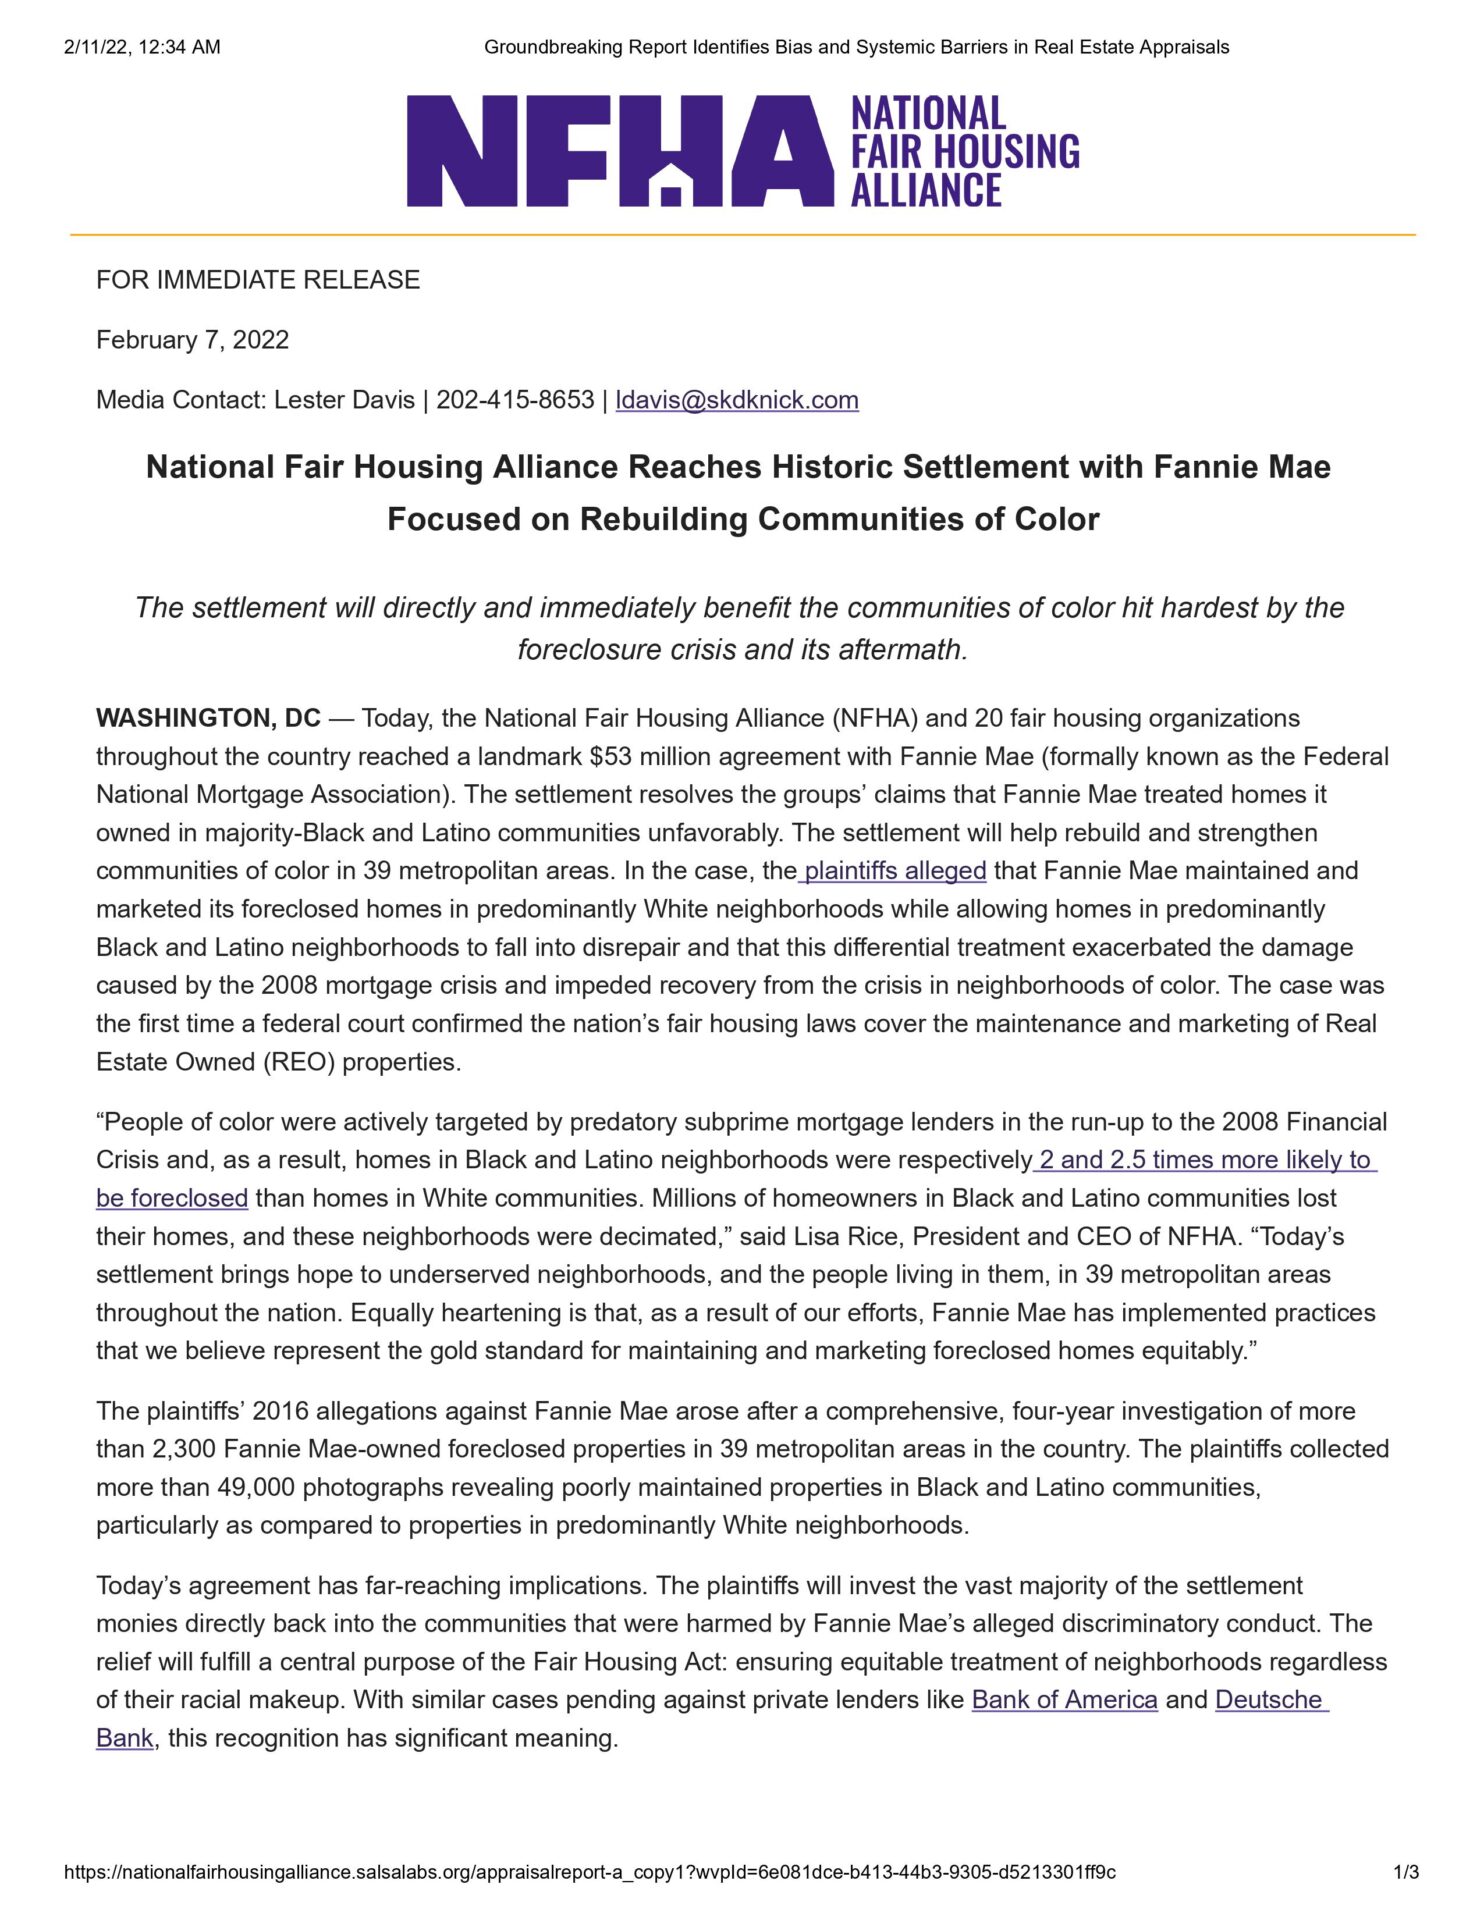 A page of the national fair housing alliance 's statement with focus on rebuilding communities of color.